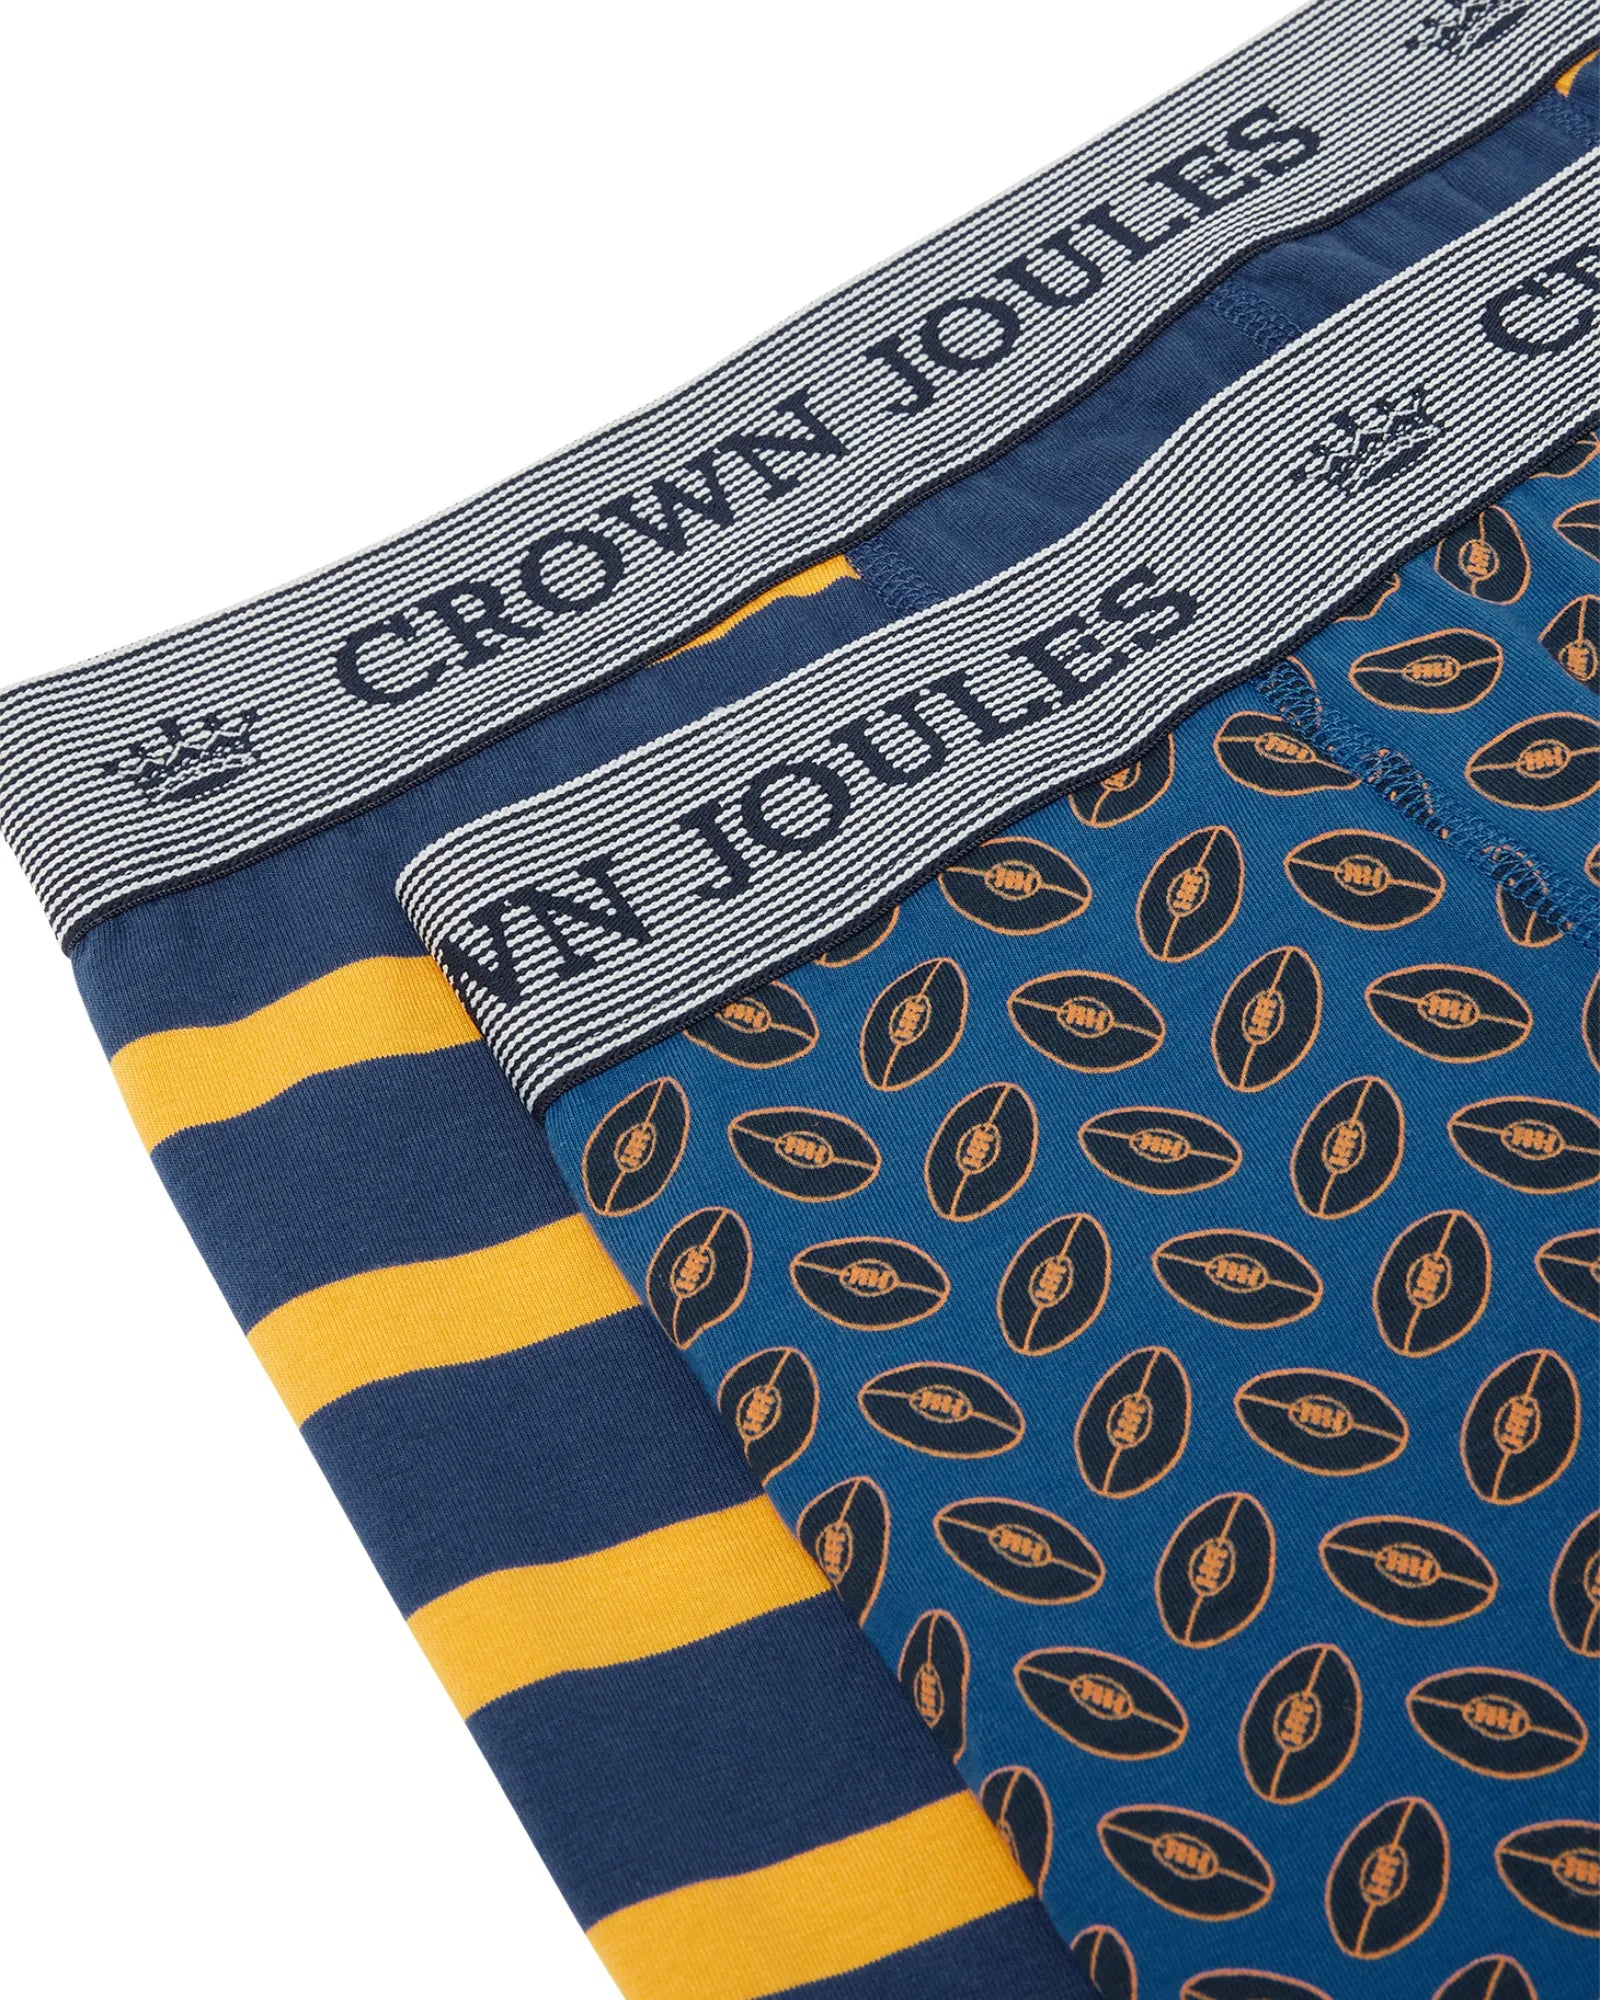 Crown Joules Boxer Shorts - Rugby Ball